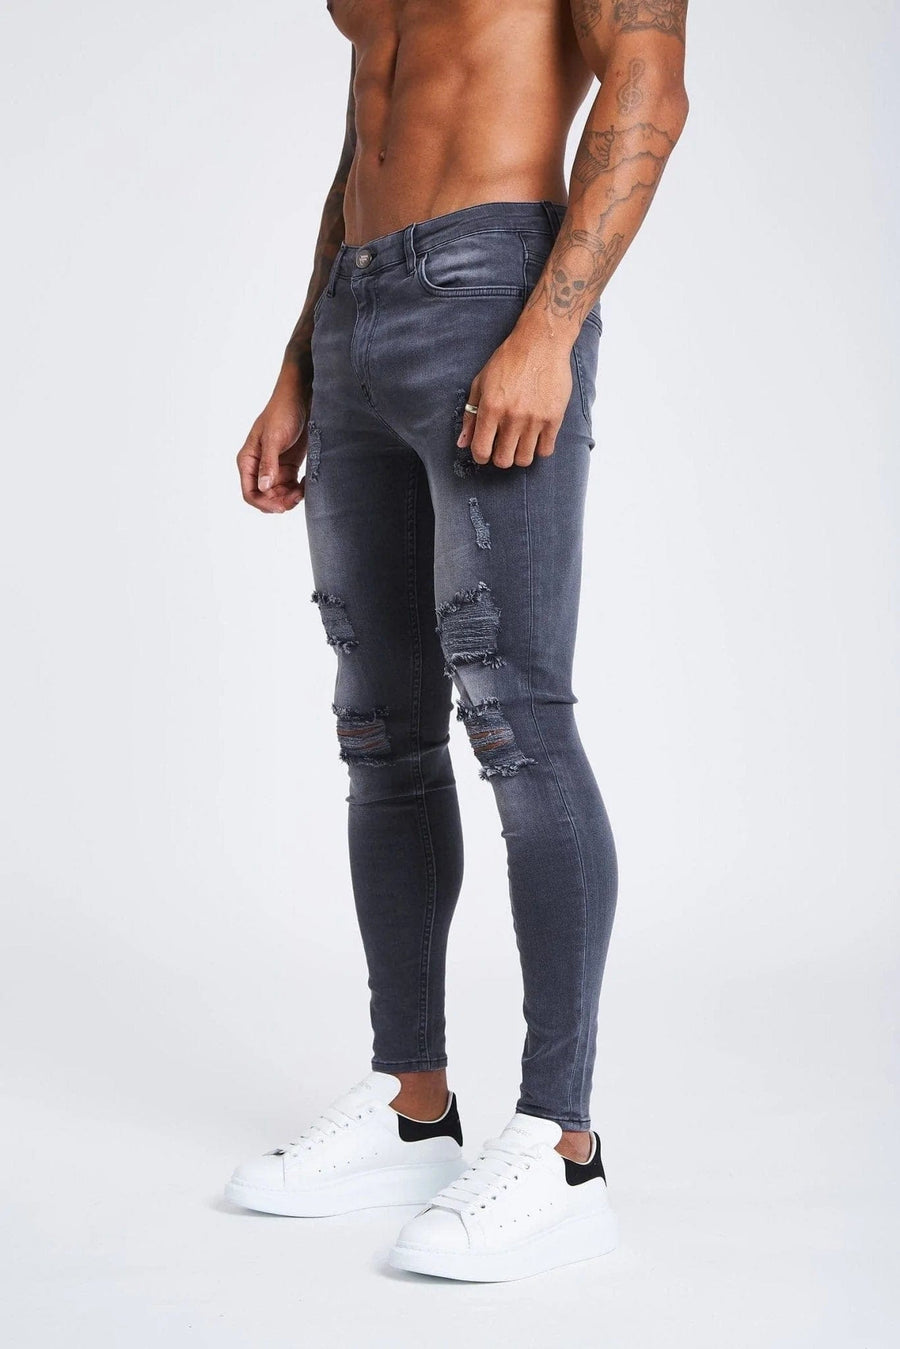 Legend London Jeans Light Grey Jeans - Ripped & Repaired